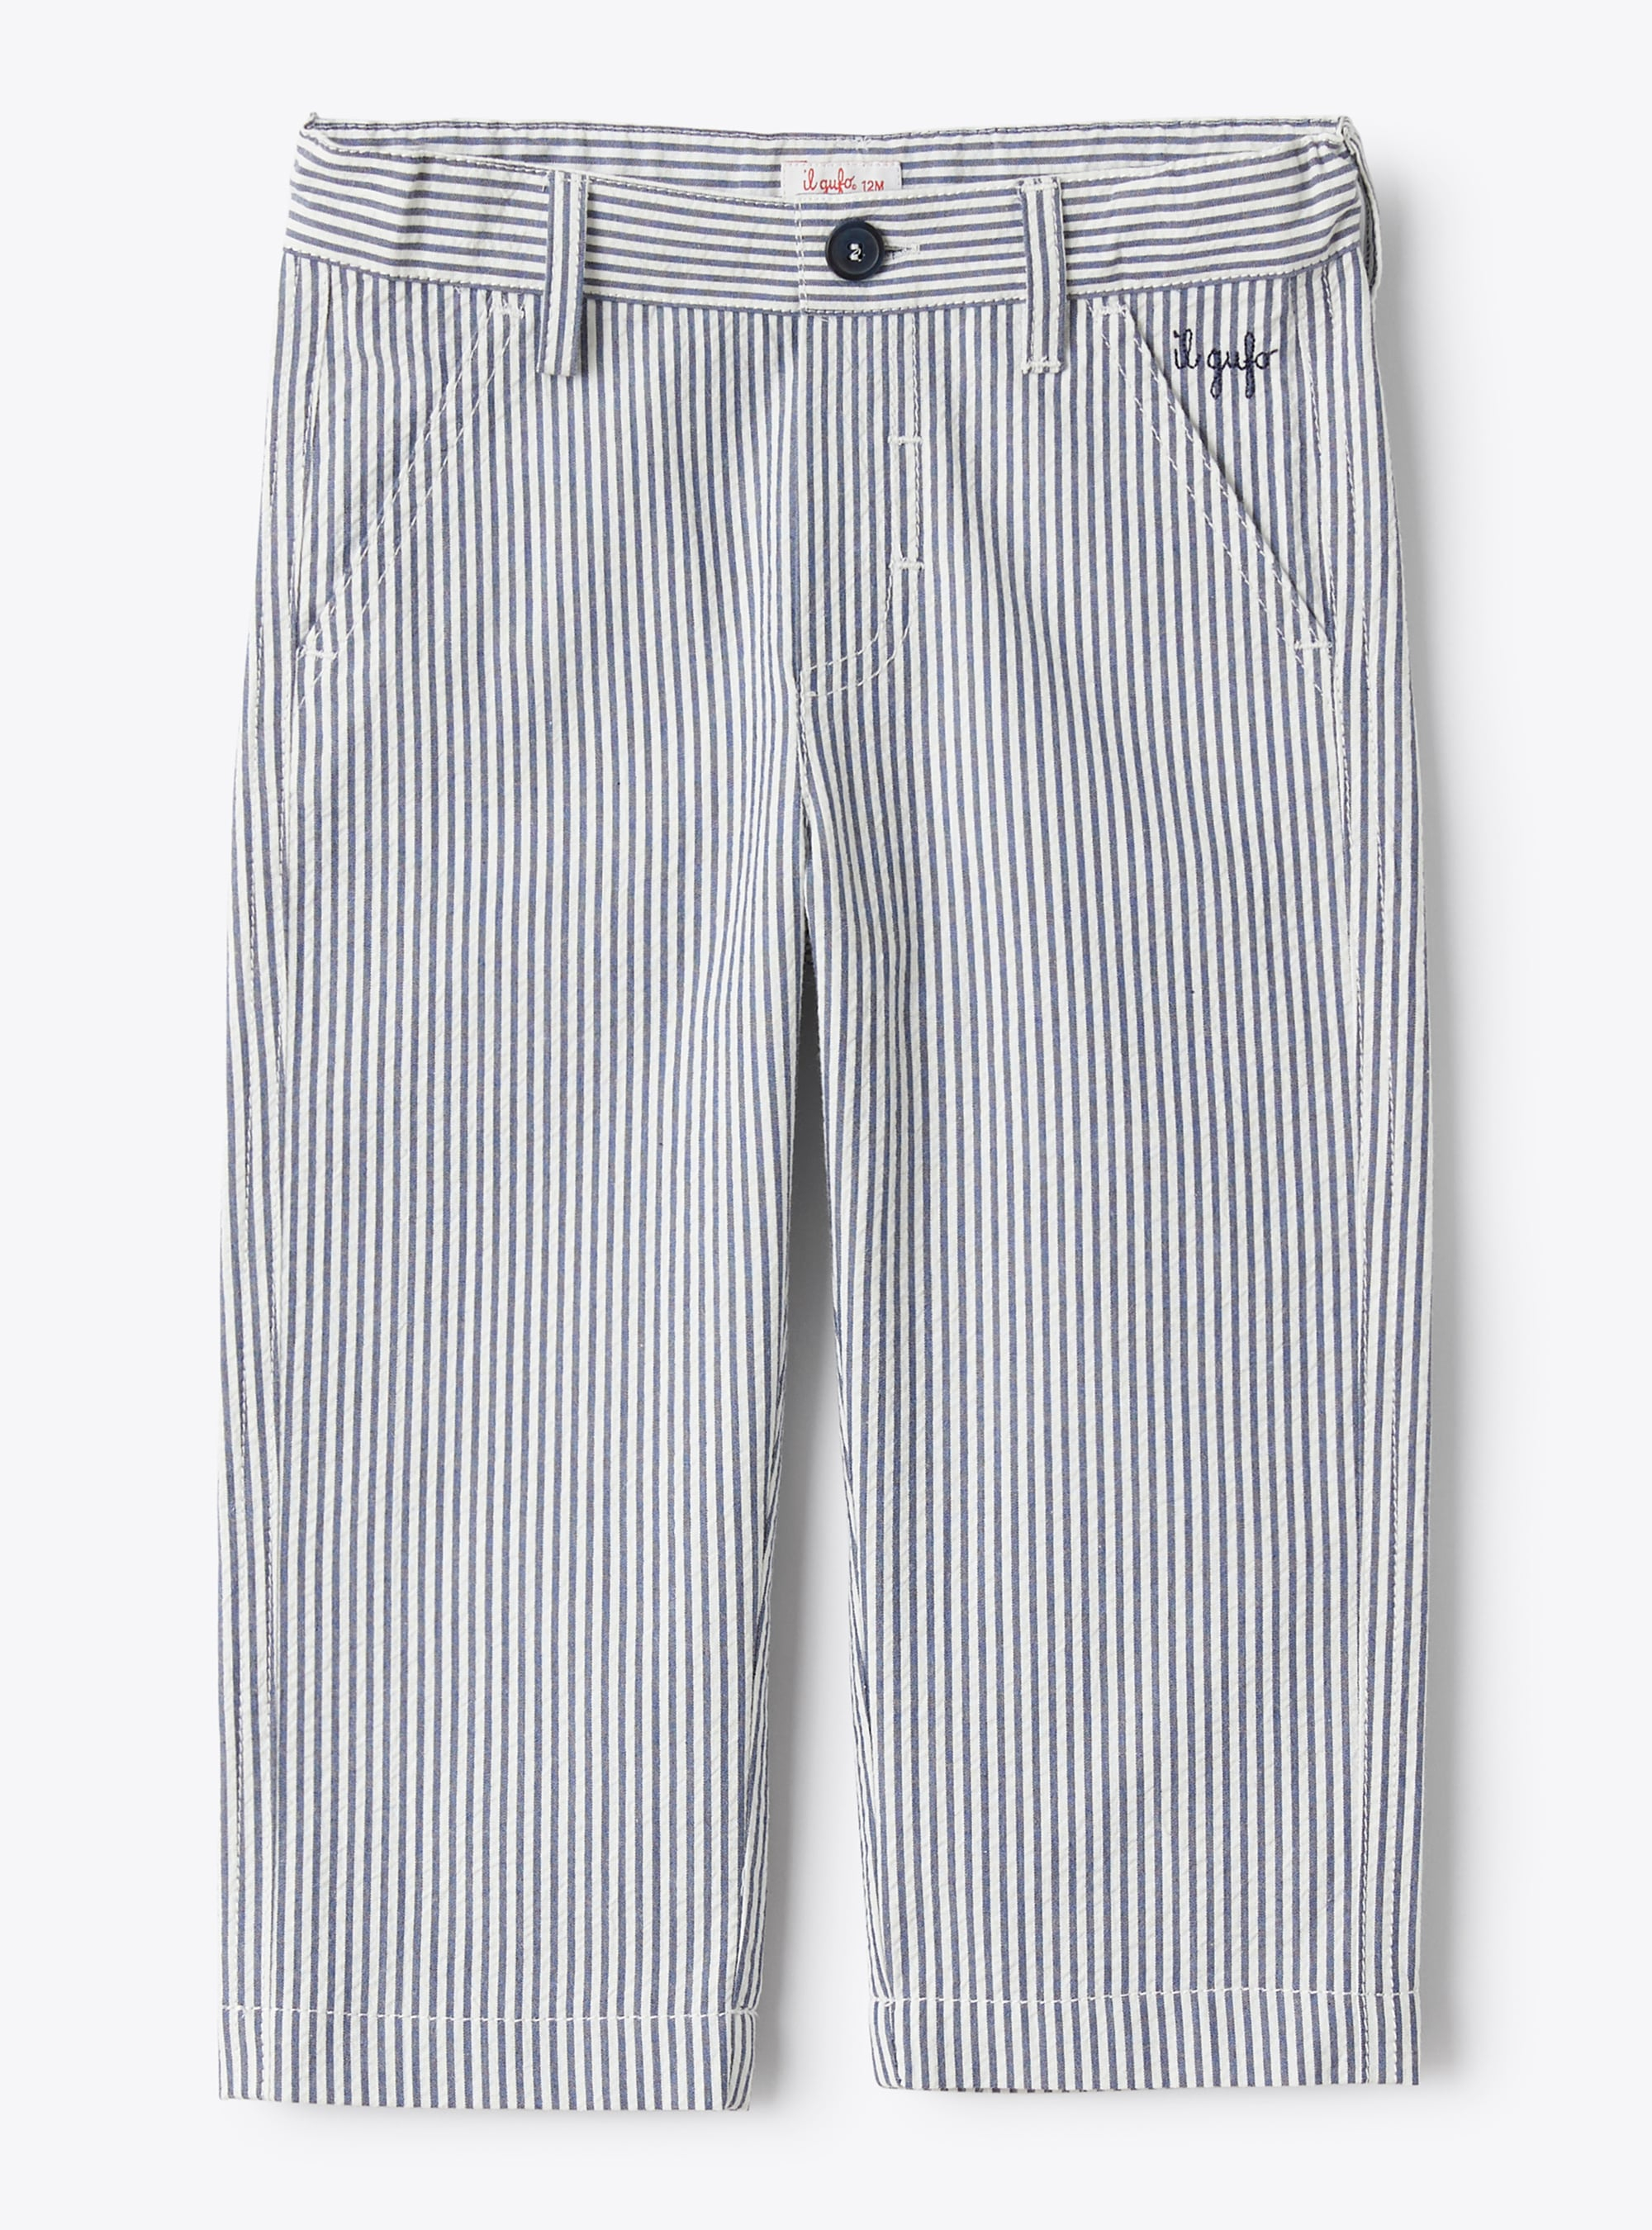 Trousers for baby boys in blue-&-white striped seersucker - Trousers - Il Gufo